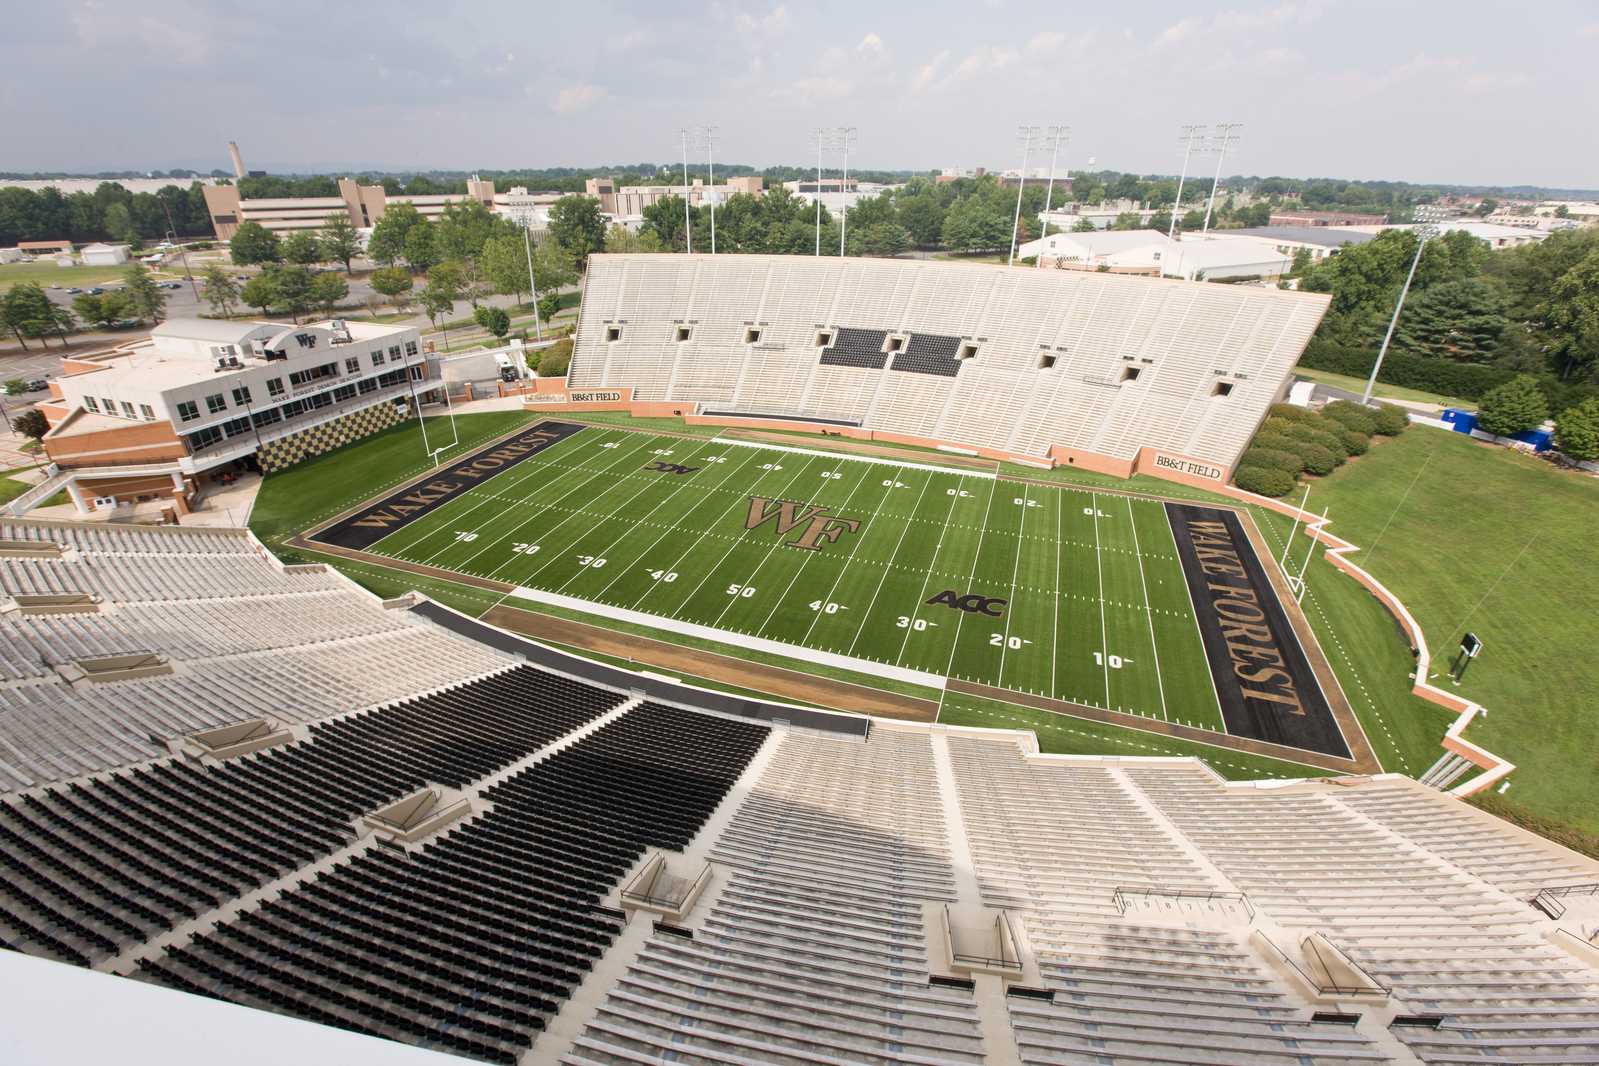 Construction work continues at Deacon Tower, the Wake Forest University football facility at BB&T Field, on Tuesday, July 29, 2008.  A view of the stadium from the roof level.